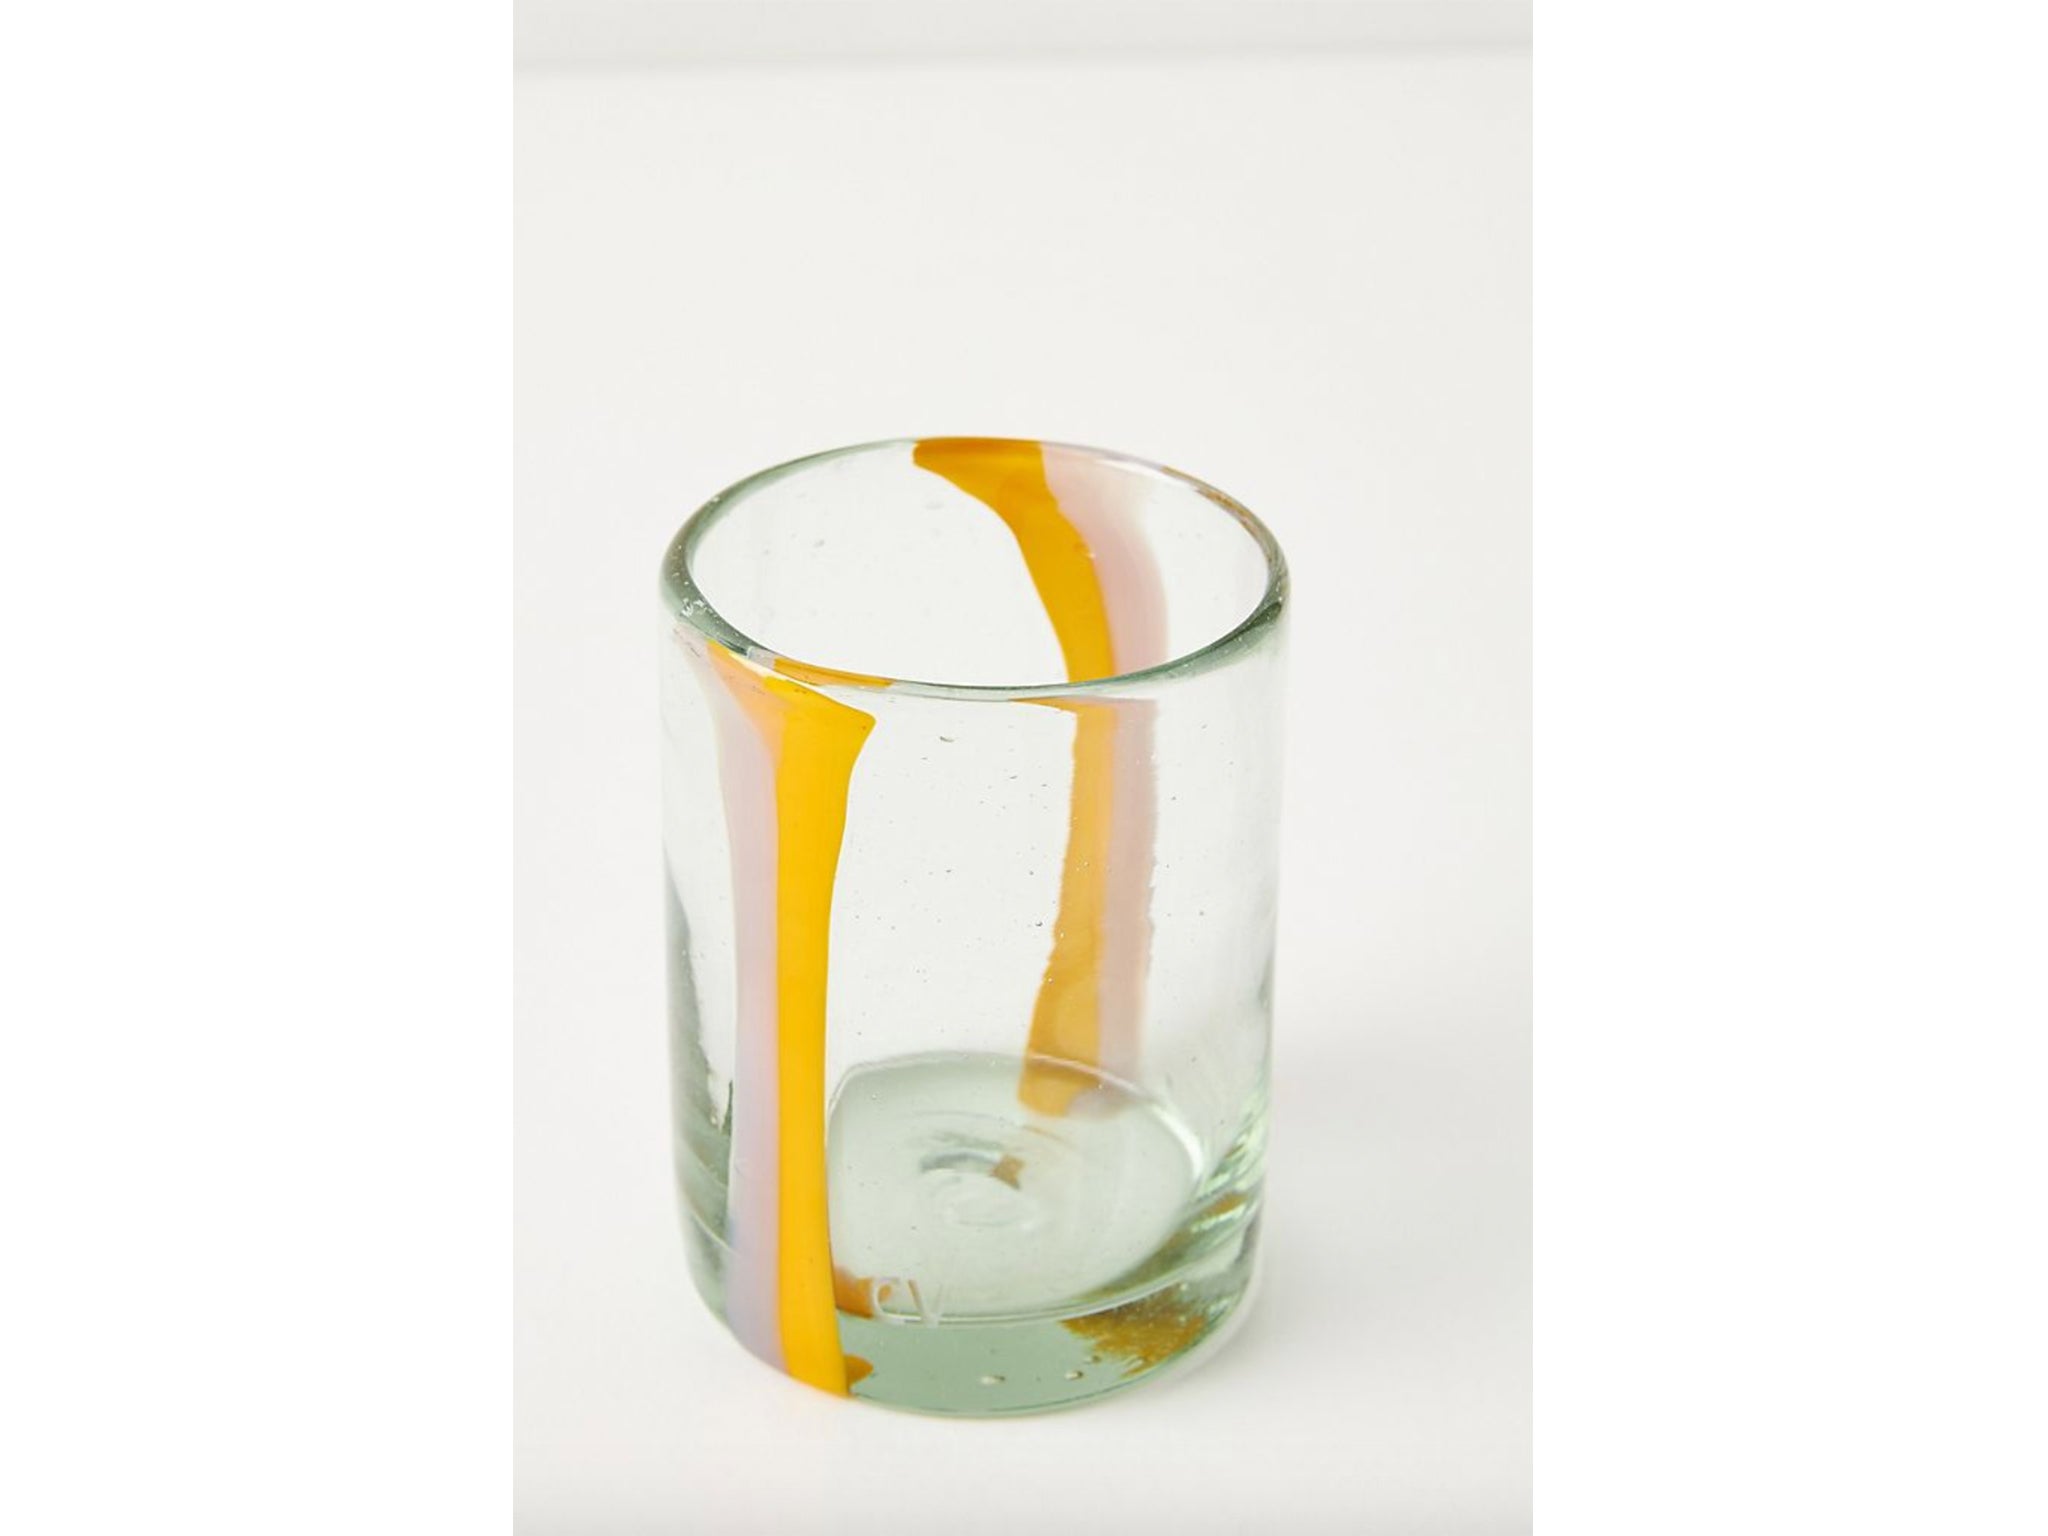 Inspired by Picasso, this is a fine piece of glassware that's perfect for special occasions